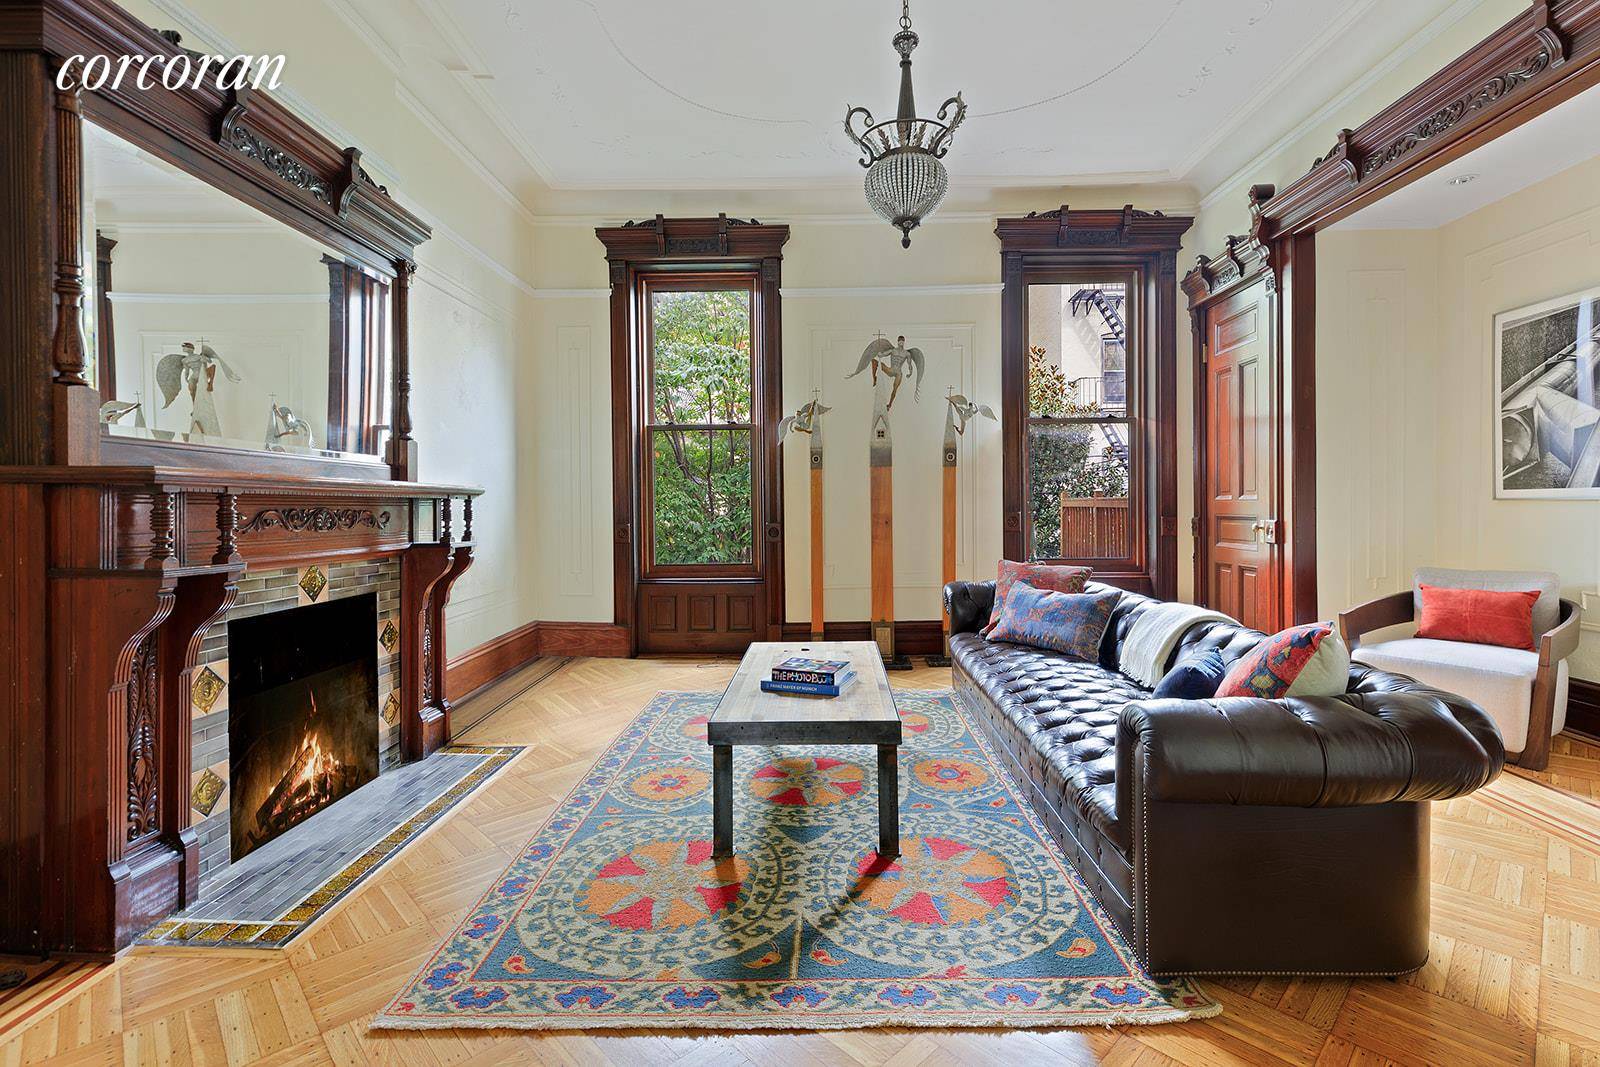 The essence of home comes alive in this beautiful, impeccably detailed and GUT renovated legal 2 family, now serving as a single family brownstone in Park Slope's most coveted locale, ...